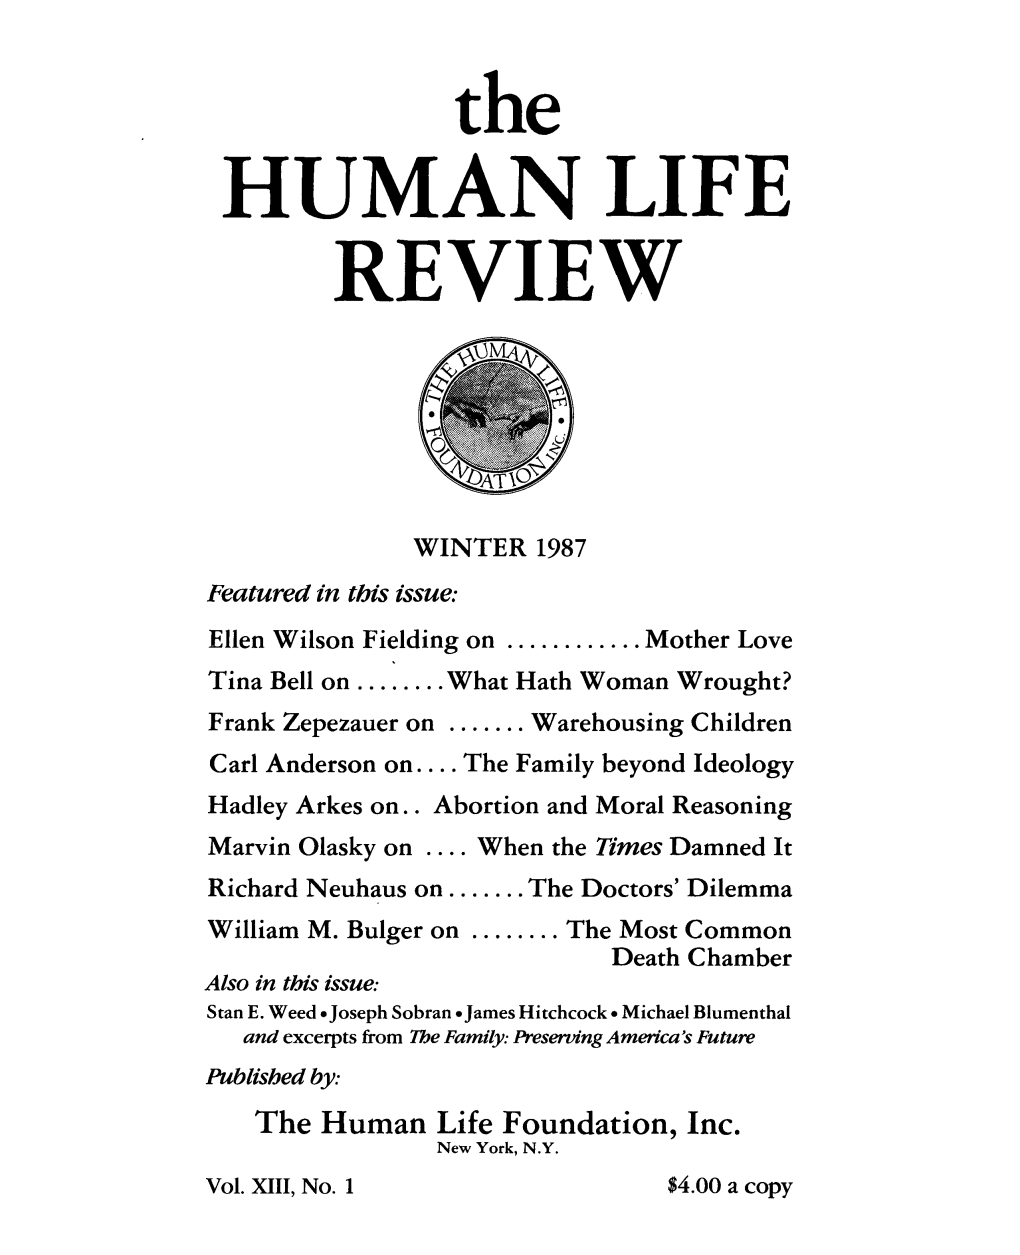 The HUMAN LIFE REVIEW